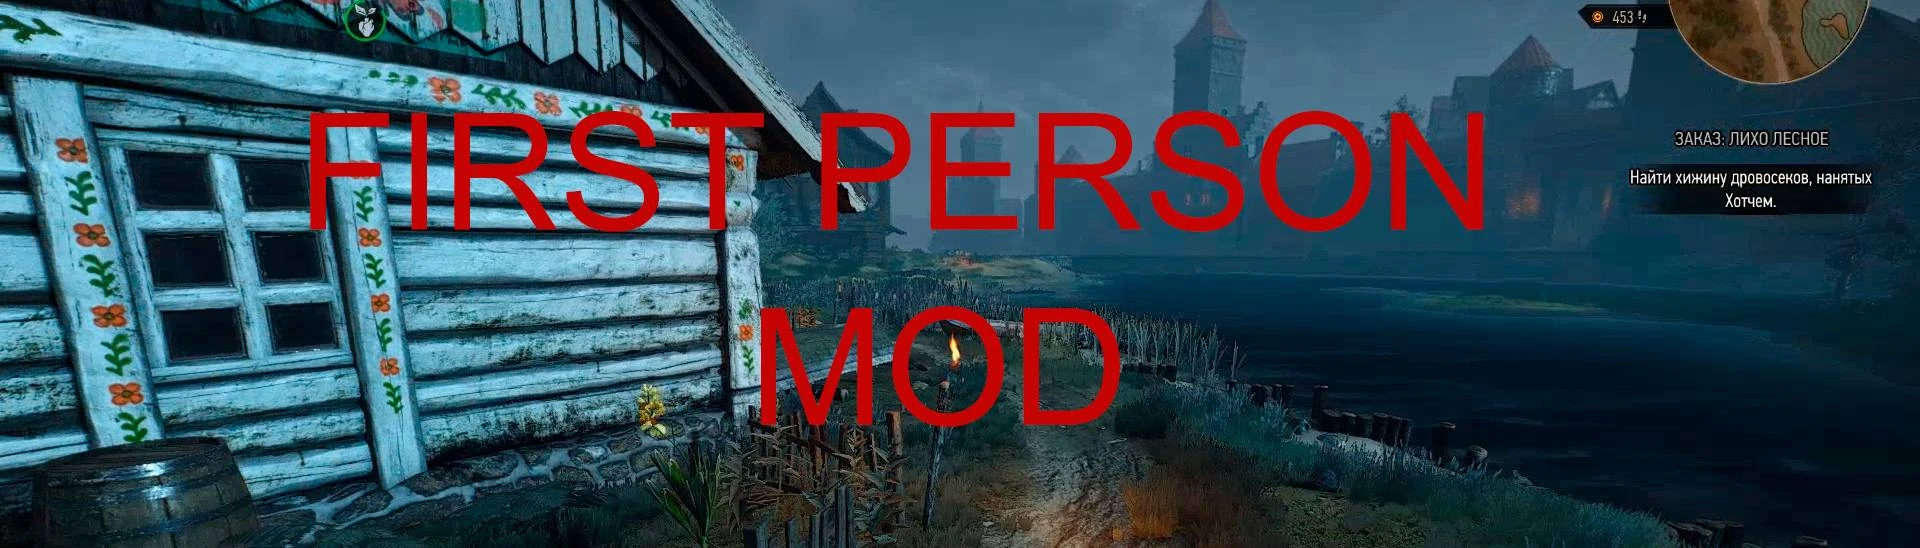 The Witcher 3's first-person mod actually kind of works